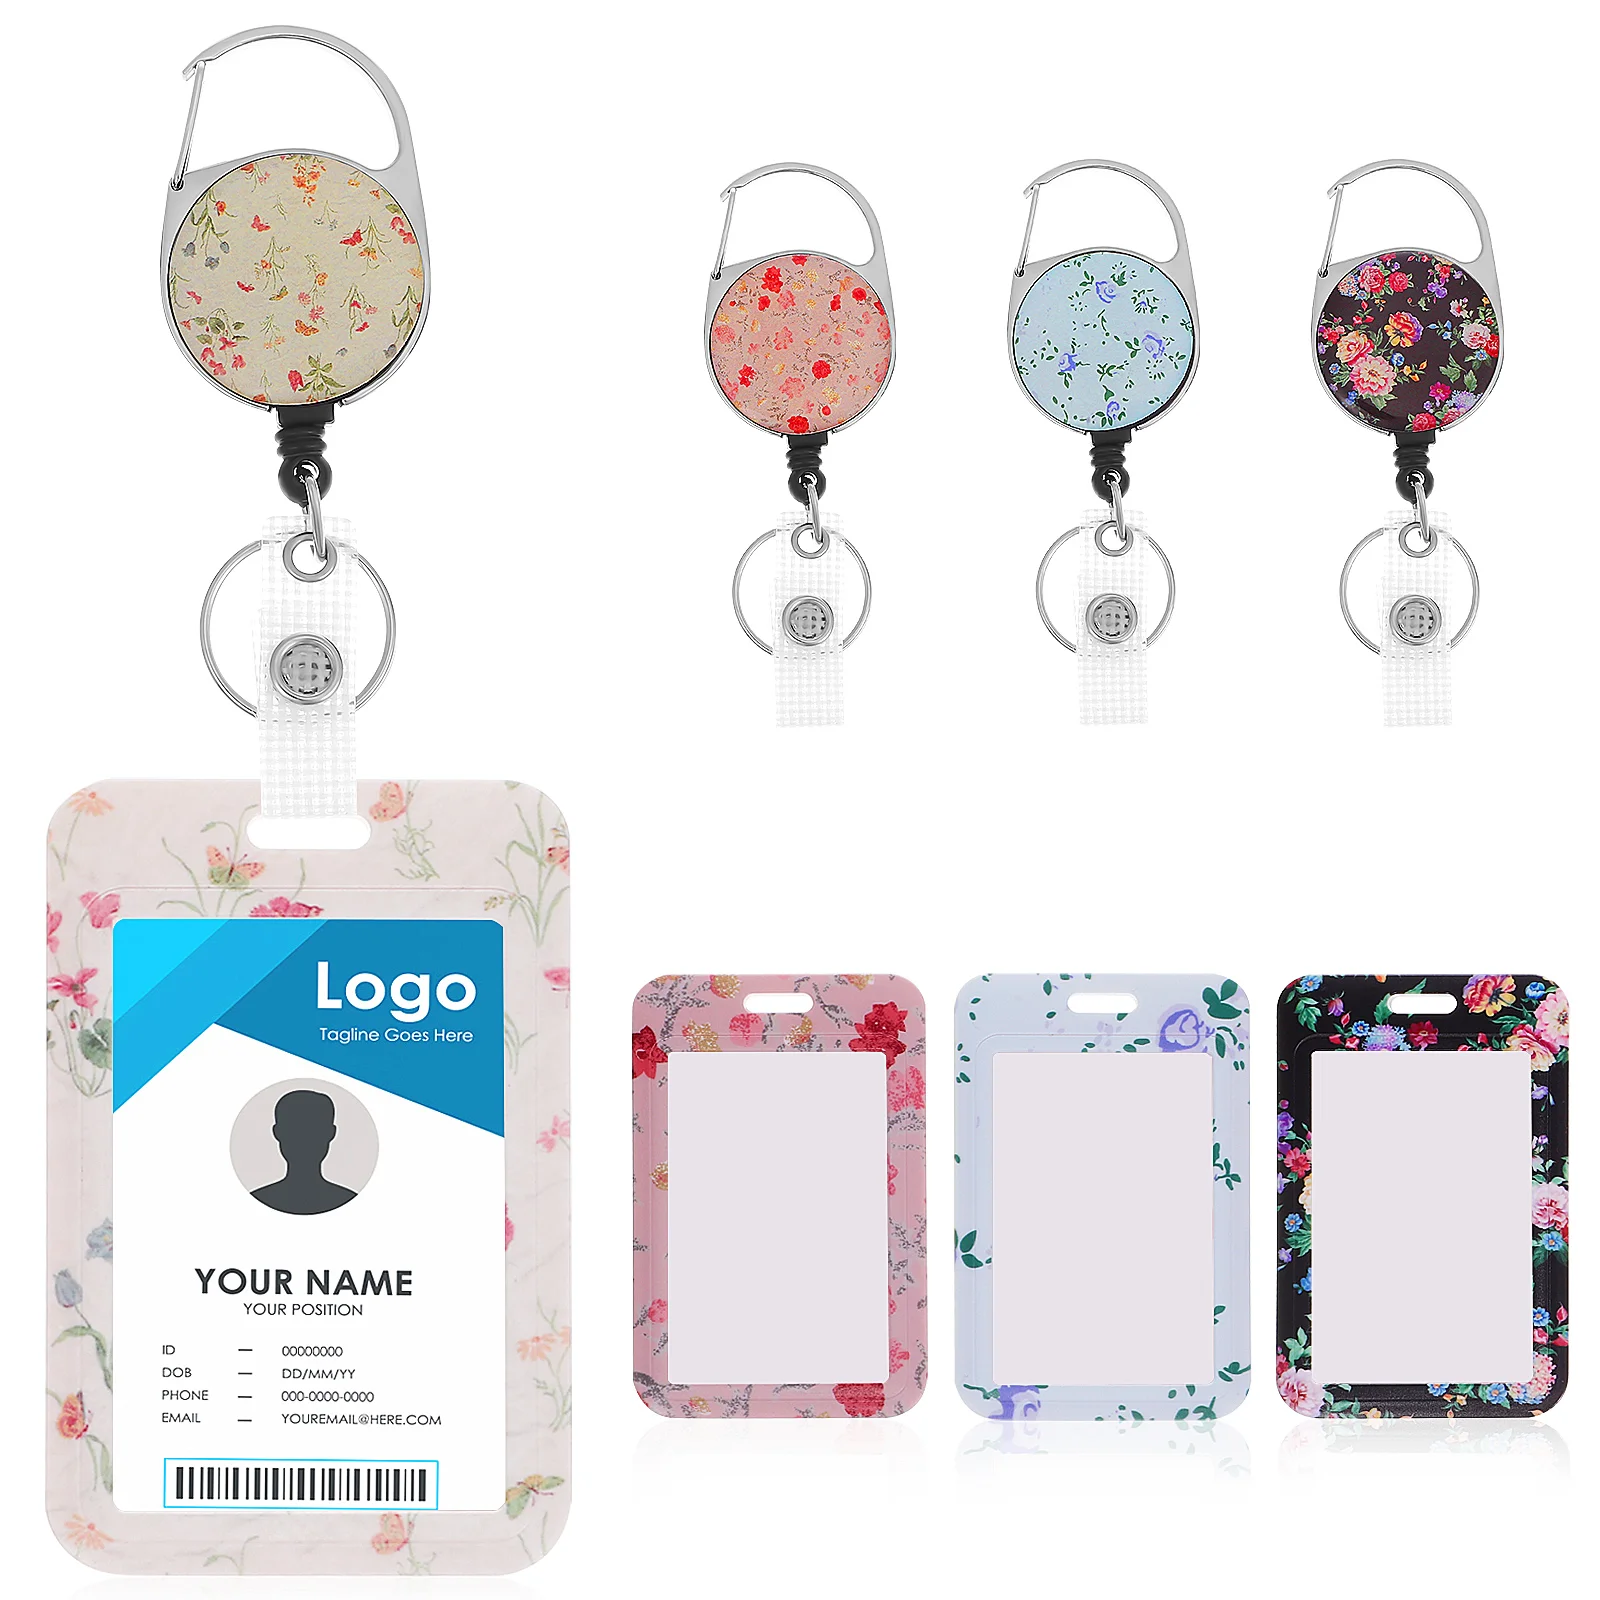 4Pcs Badge Holder Floral Printing ID Card Sleeve with Retractable Reel for Nurse Student Worker